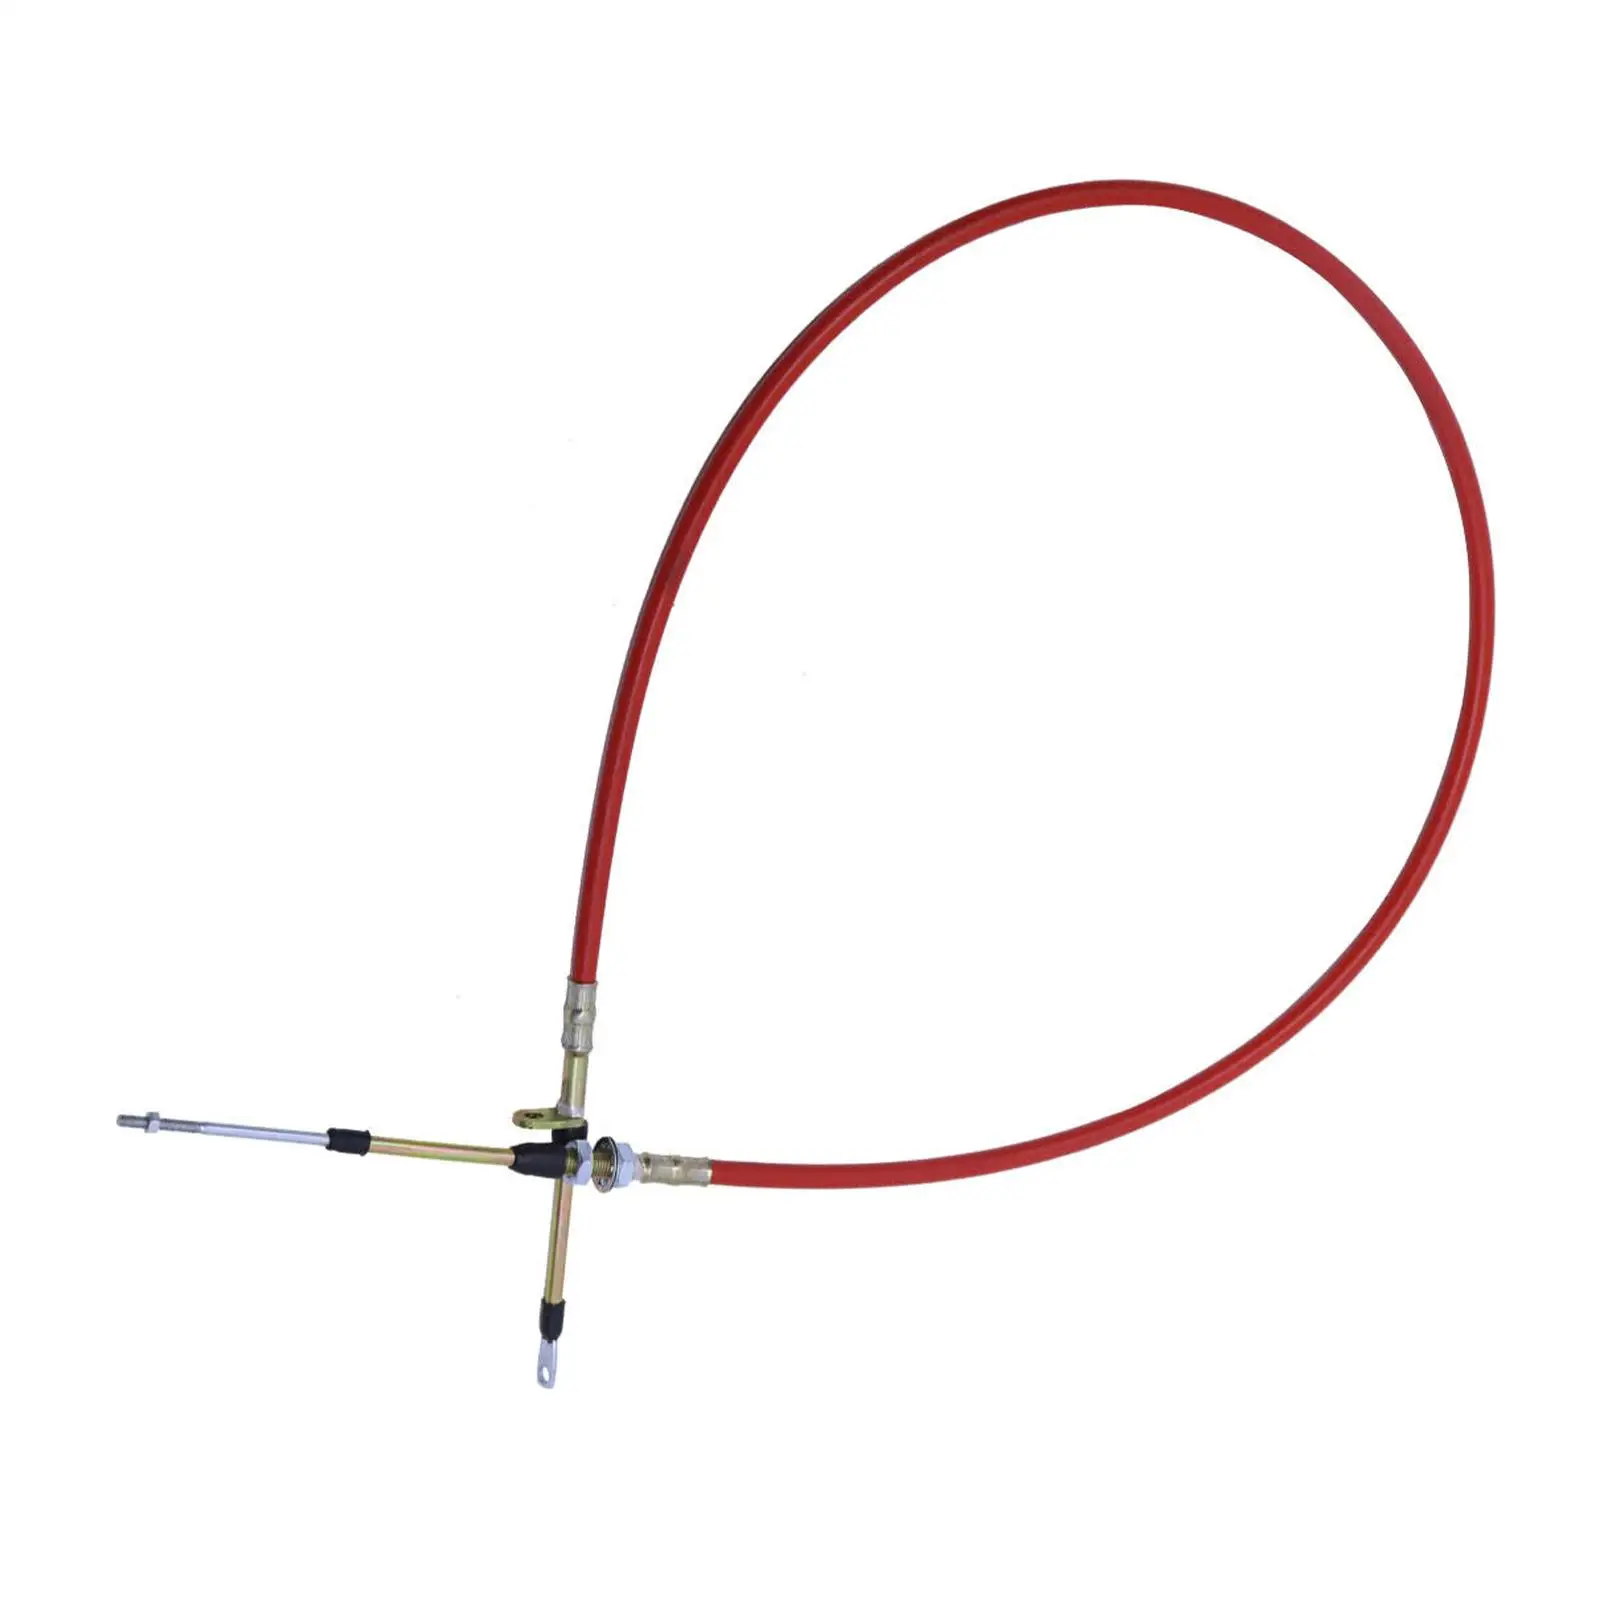 Shifter Cable Car Accessories AF721002 for B M Shifters Professional Long Service Life High Performance Easy to Mount